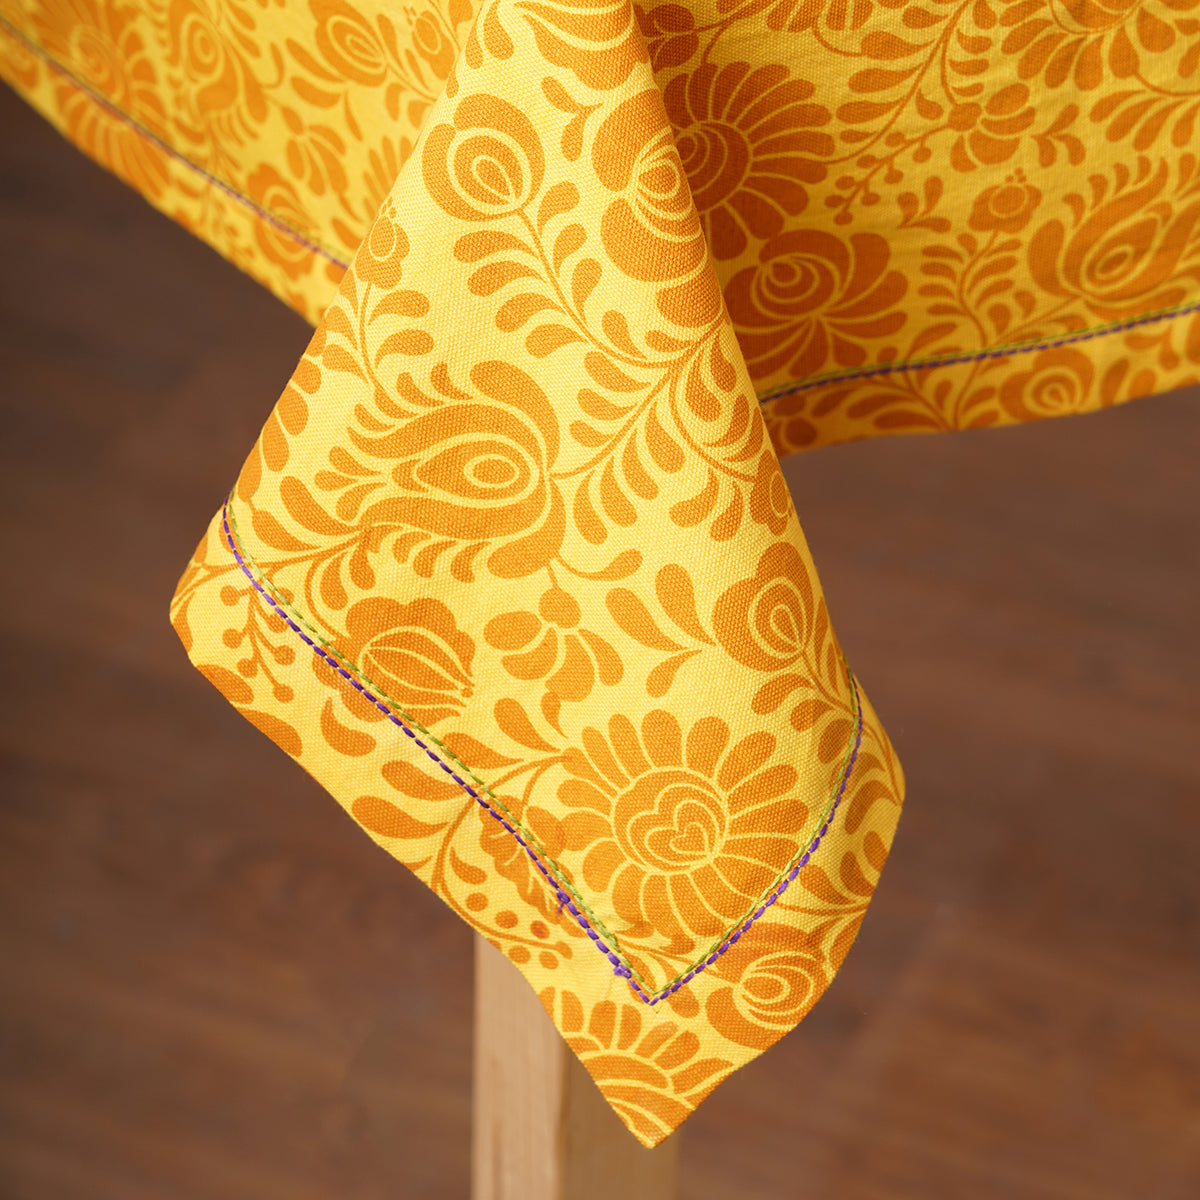 MATYO - Yellow colour Table cloth, floral print cotton fabric, size available, Napkins available